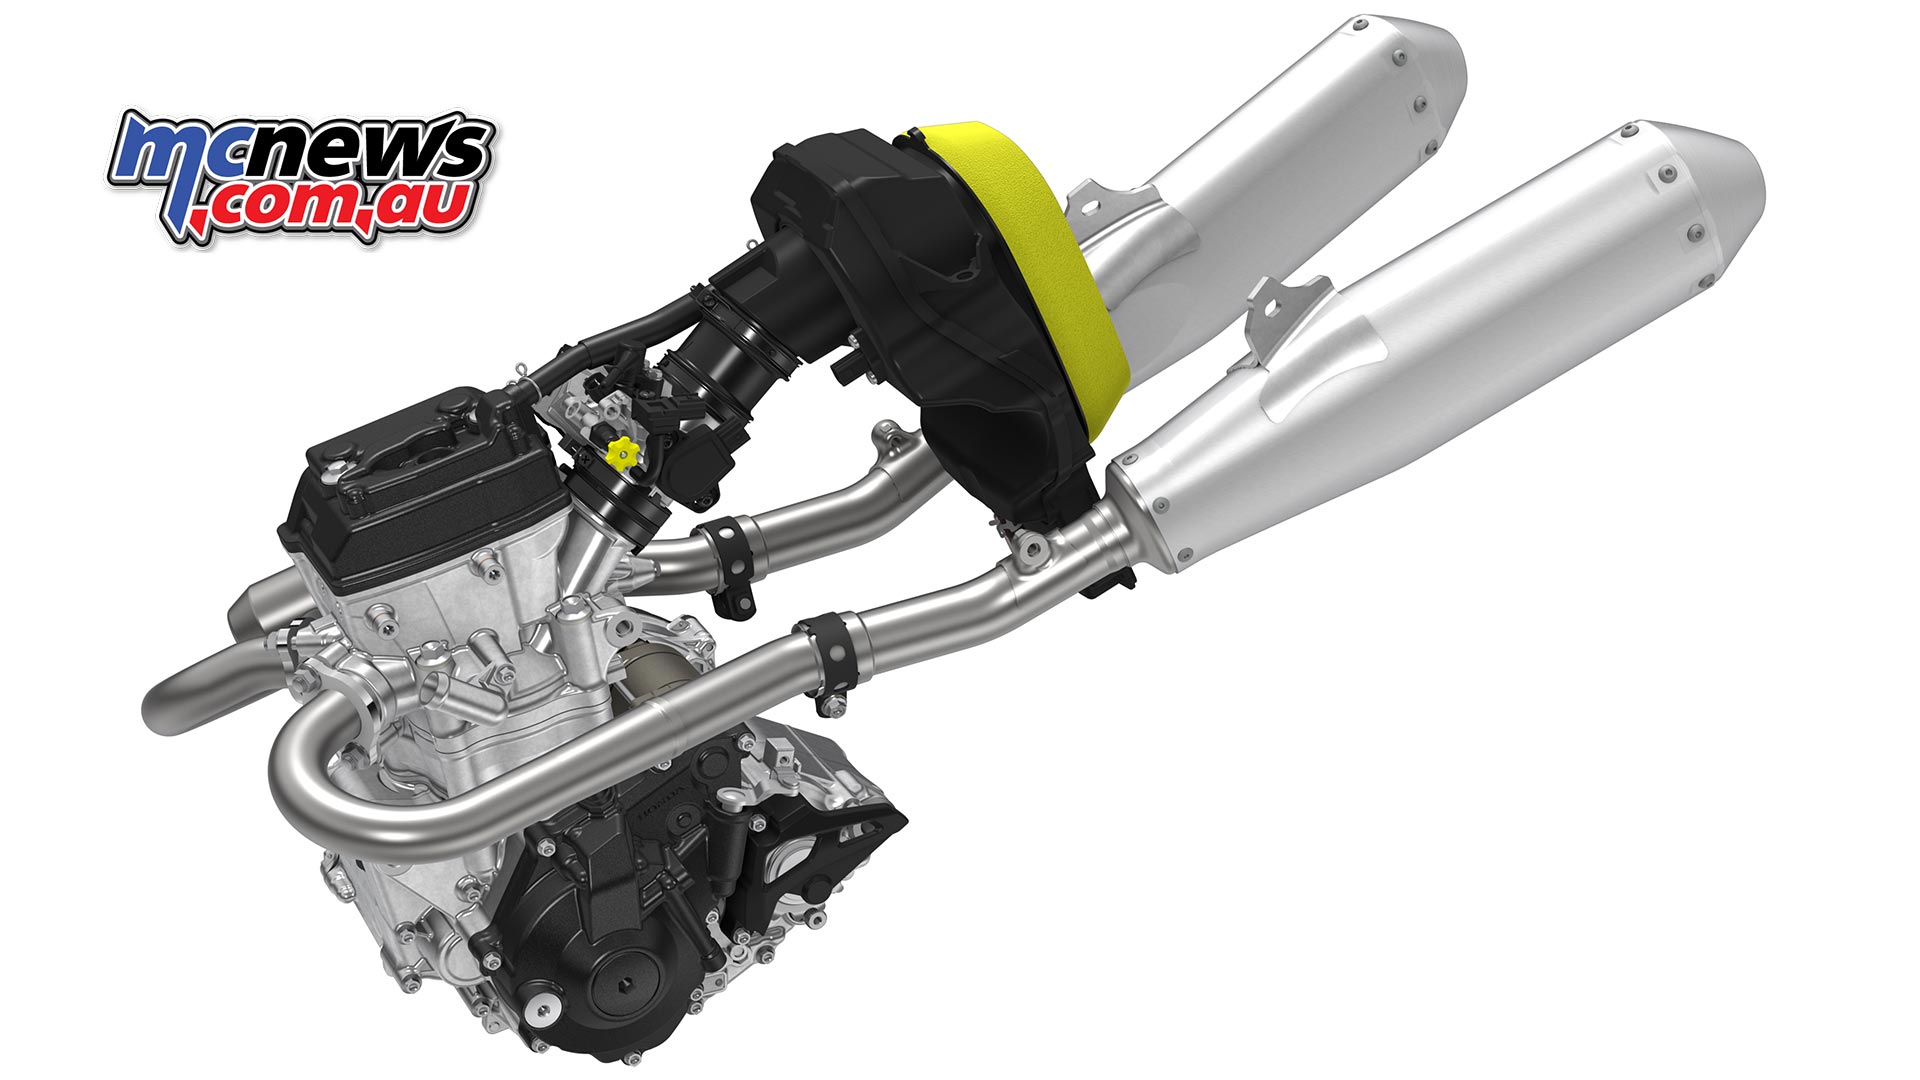 2018 CRF250R New DOHC engine | CRF450R Chassis | MCNews